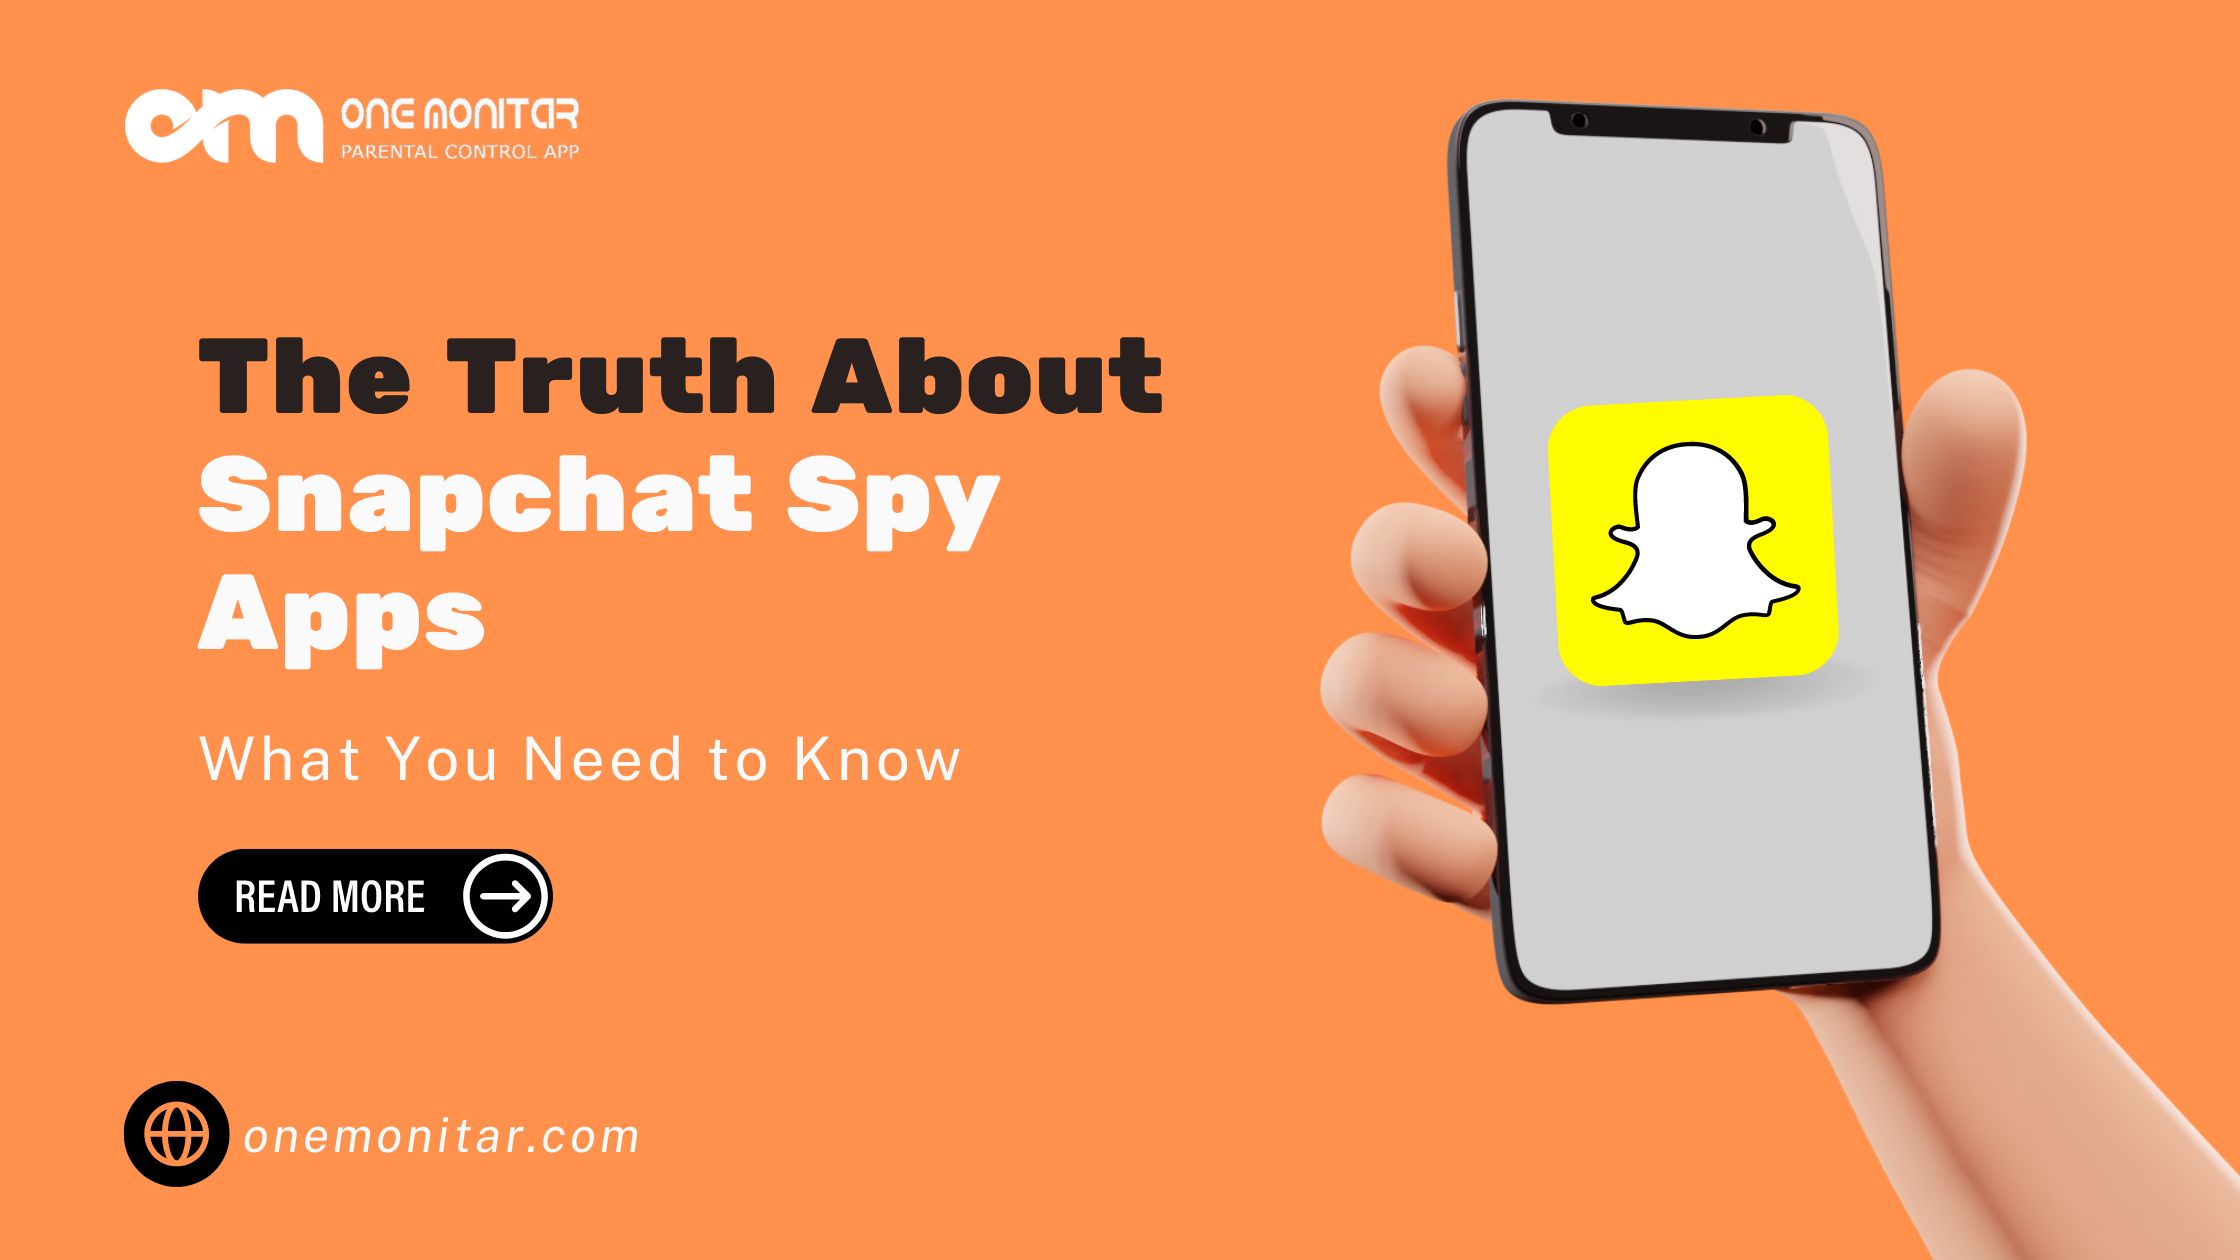 The Truth About Snapchat Spy Apps